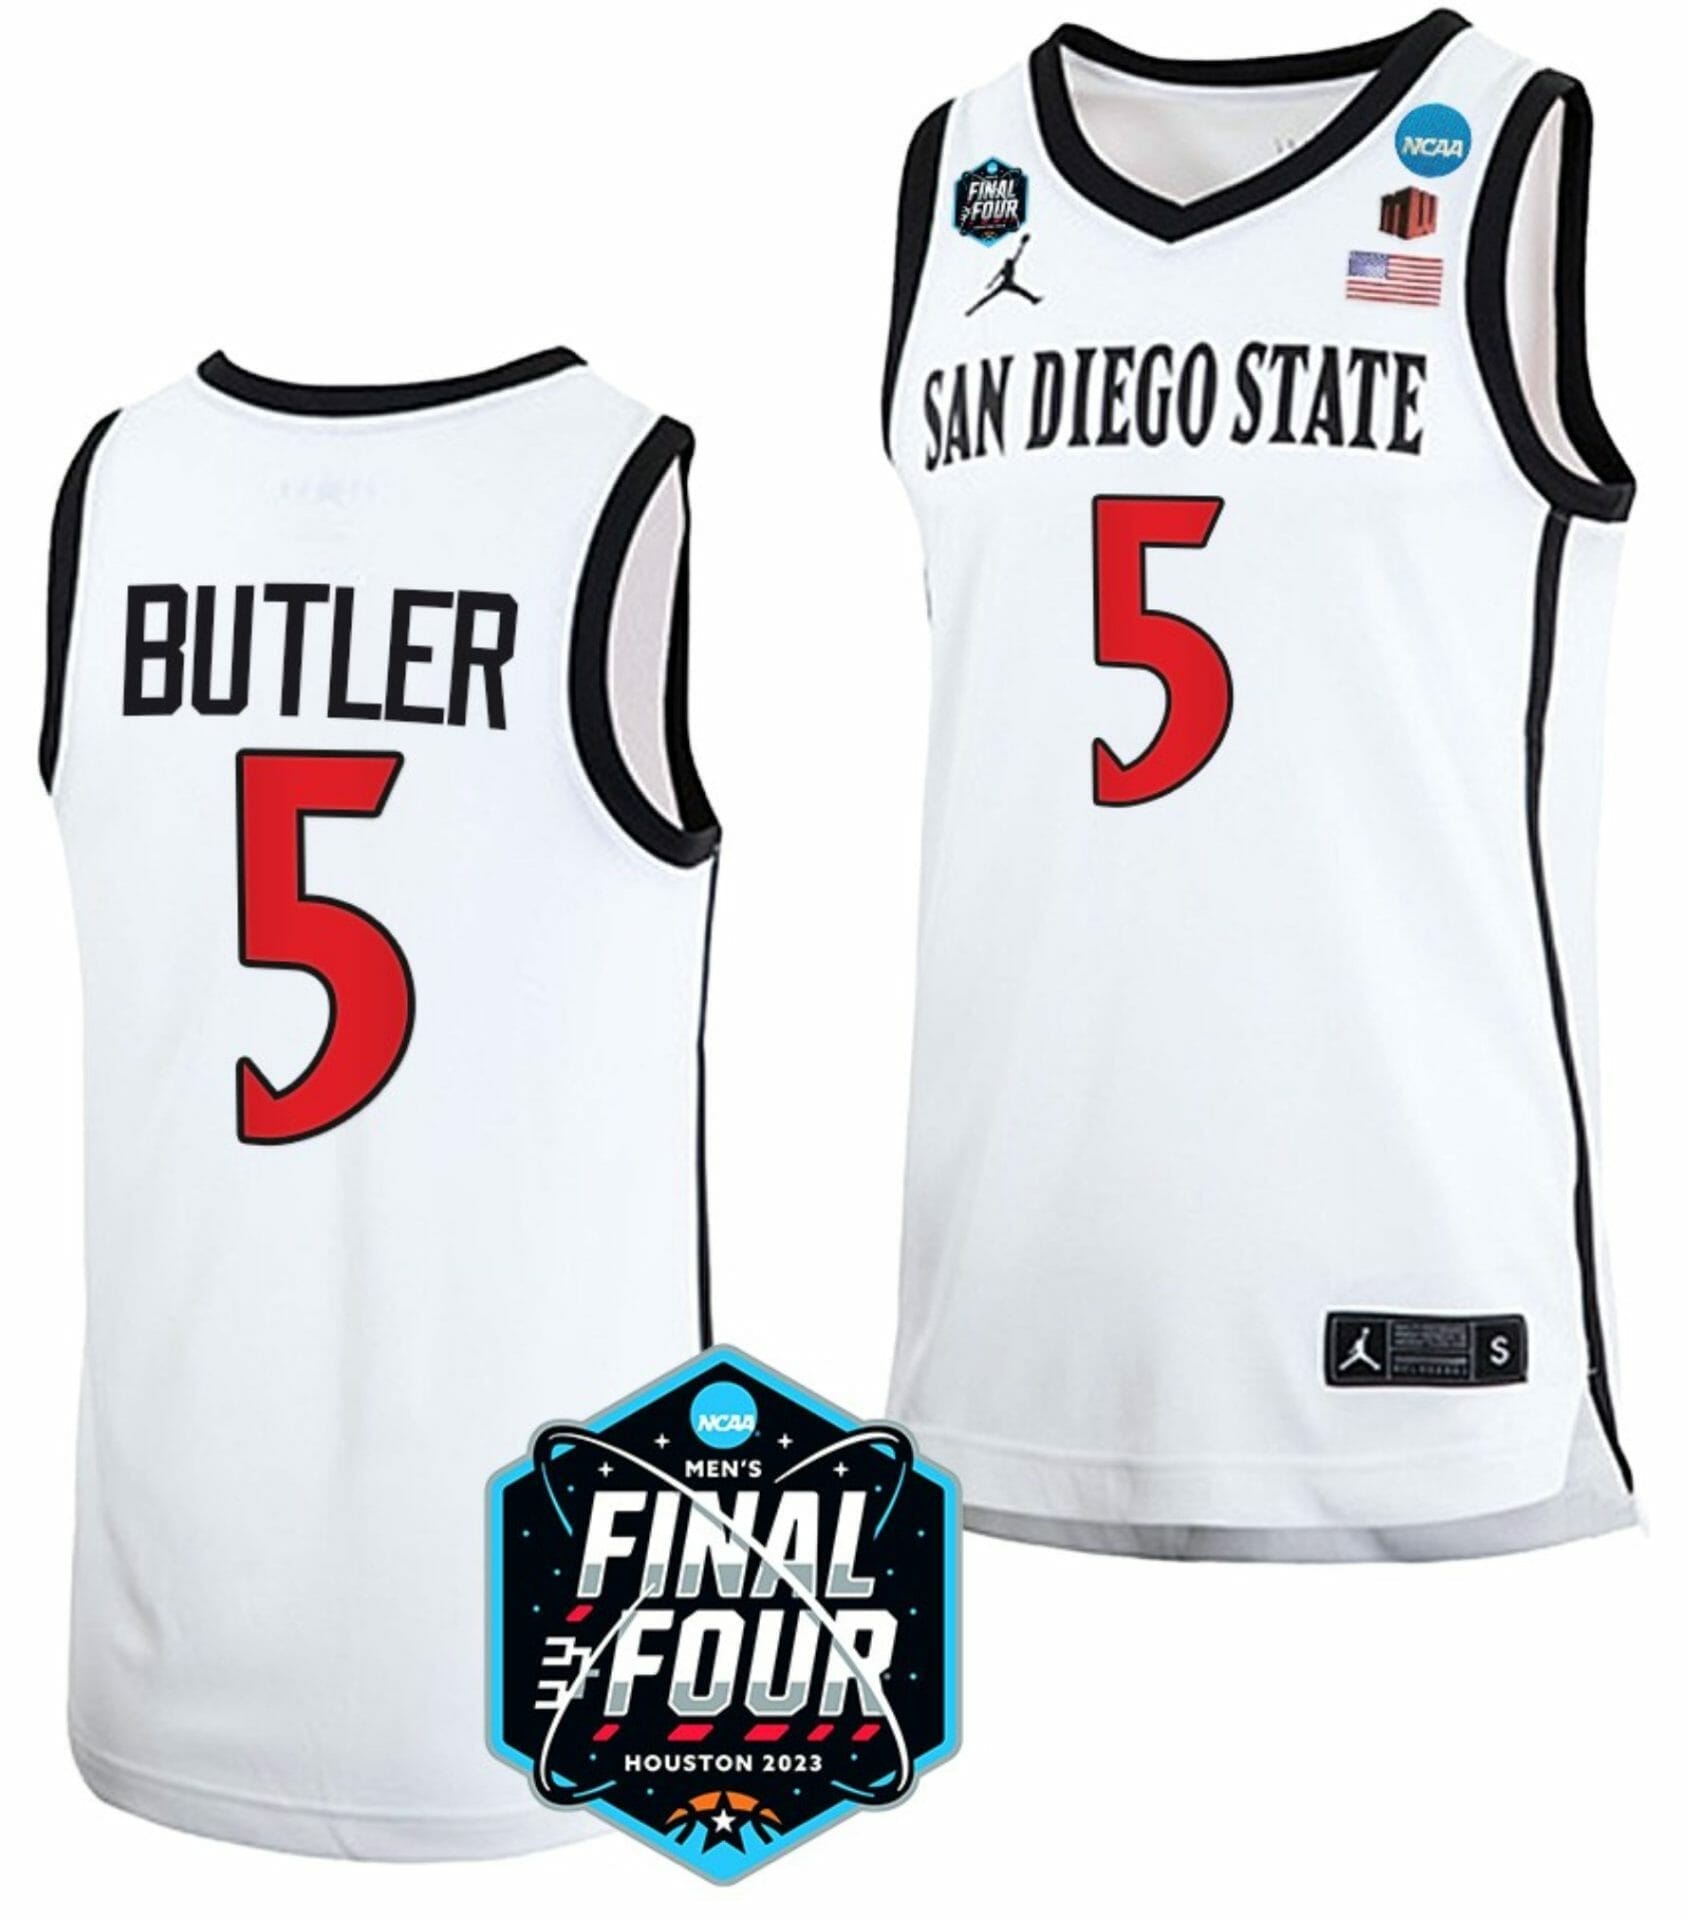 design clippers white jersey